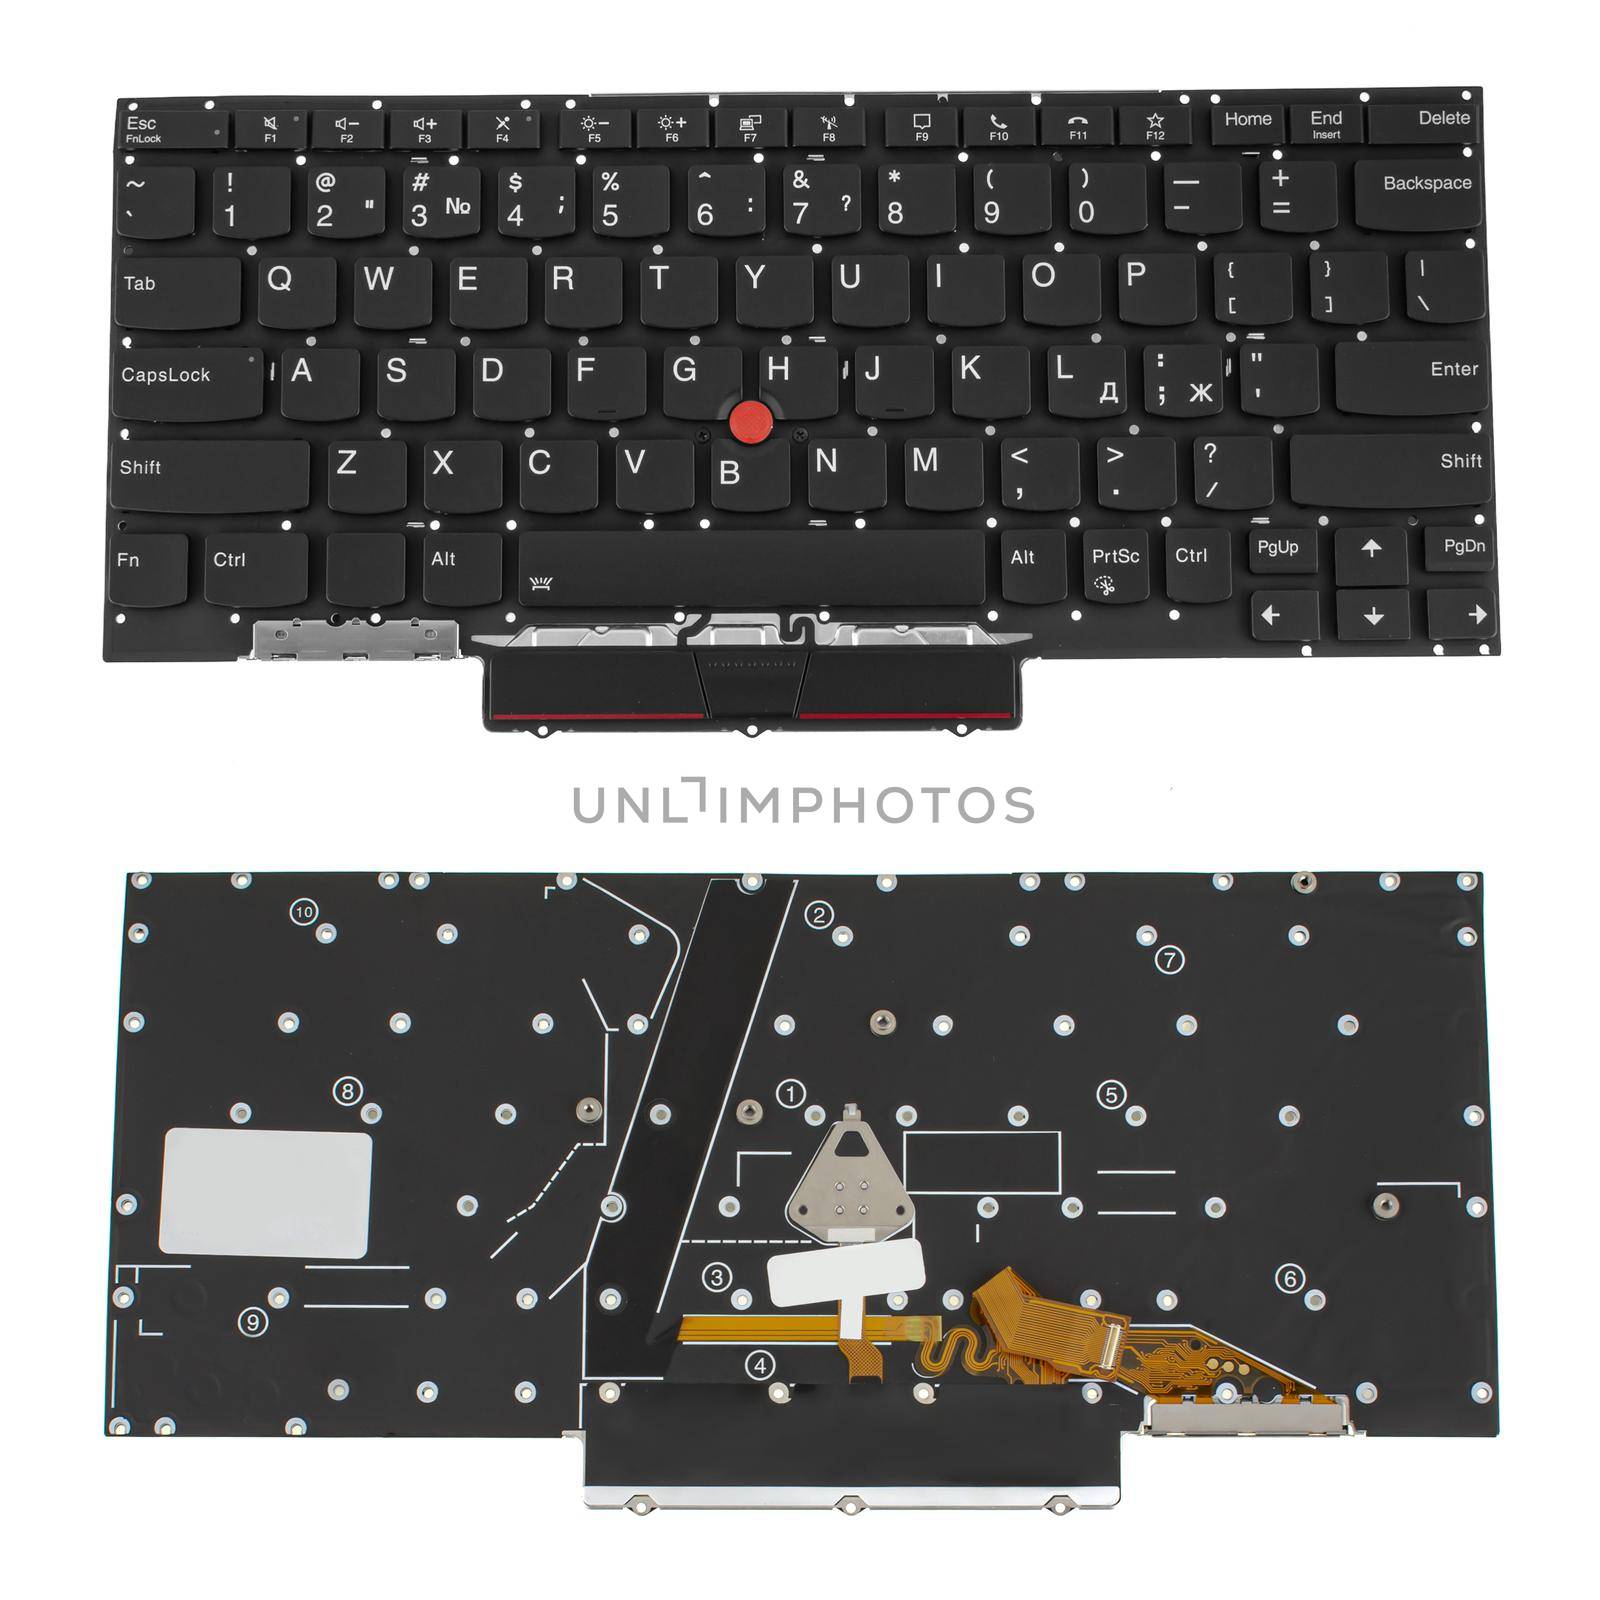 Keyboard for laptop, view from two sides on a white background